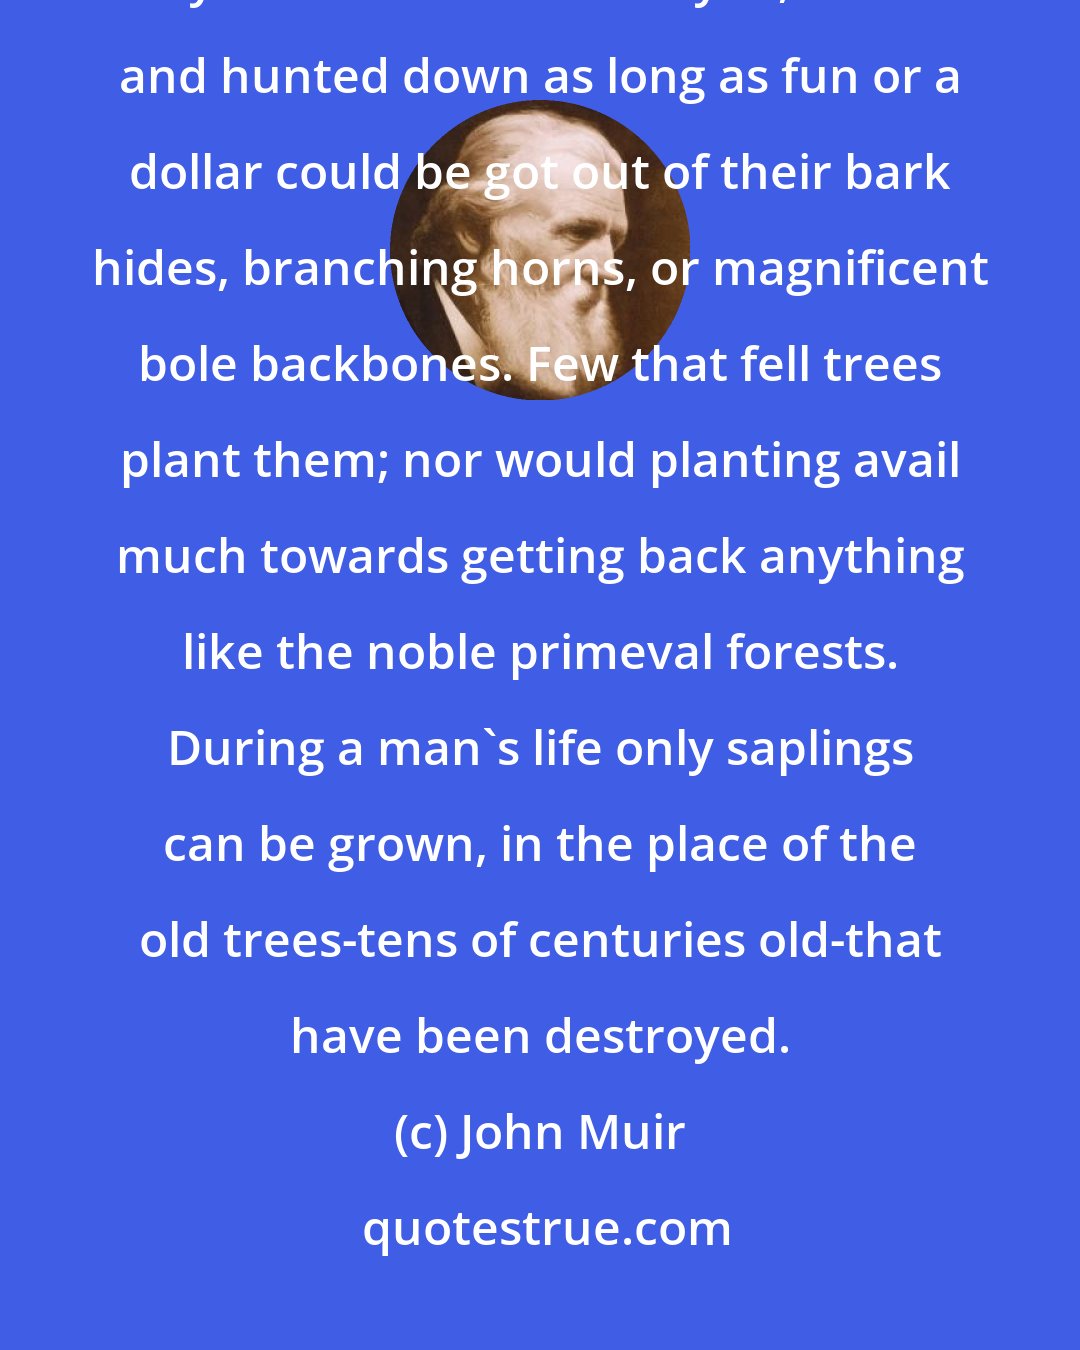 John Muir: Any fool can destroy trees. They cannot run away; and if they could, they would still be destroyed,-chased and hunted down as long as fun or a dollar could be got out of their bark hides, branching horns, or magnificent bole backbones. Few that fell trees plant them; nor would planting avail much towards getting back anything like the noble primeval forests. During a man's life only saplings can be grown, in the place of the old trees-tens of centuries old-that have been destroyed.